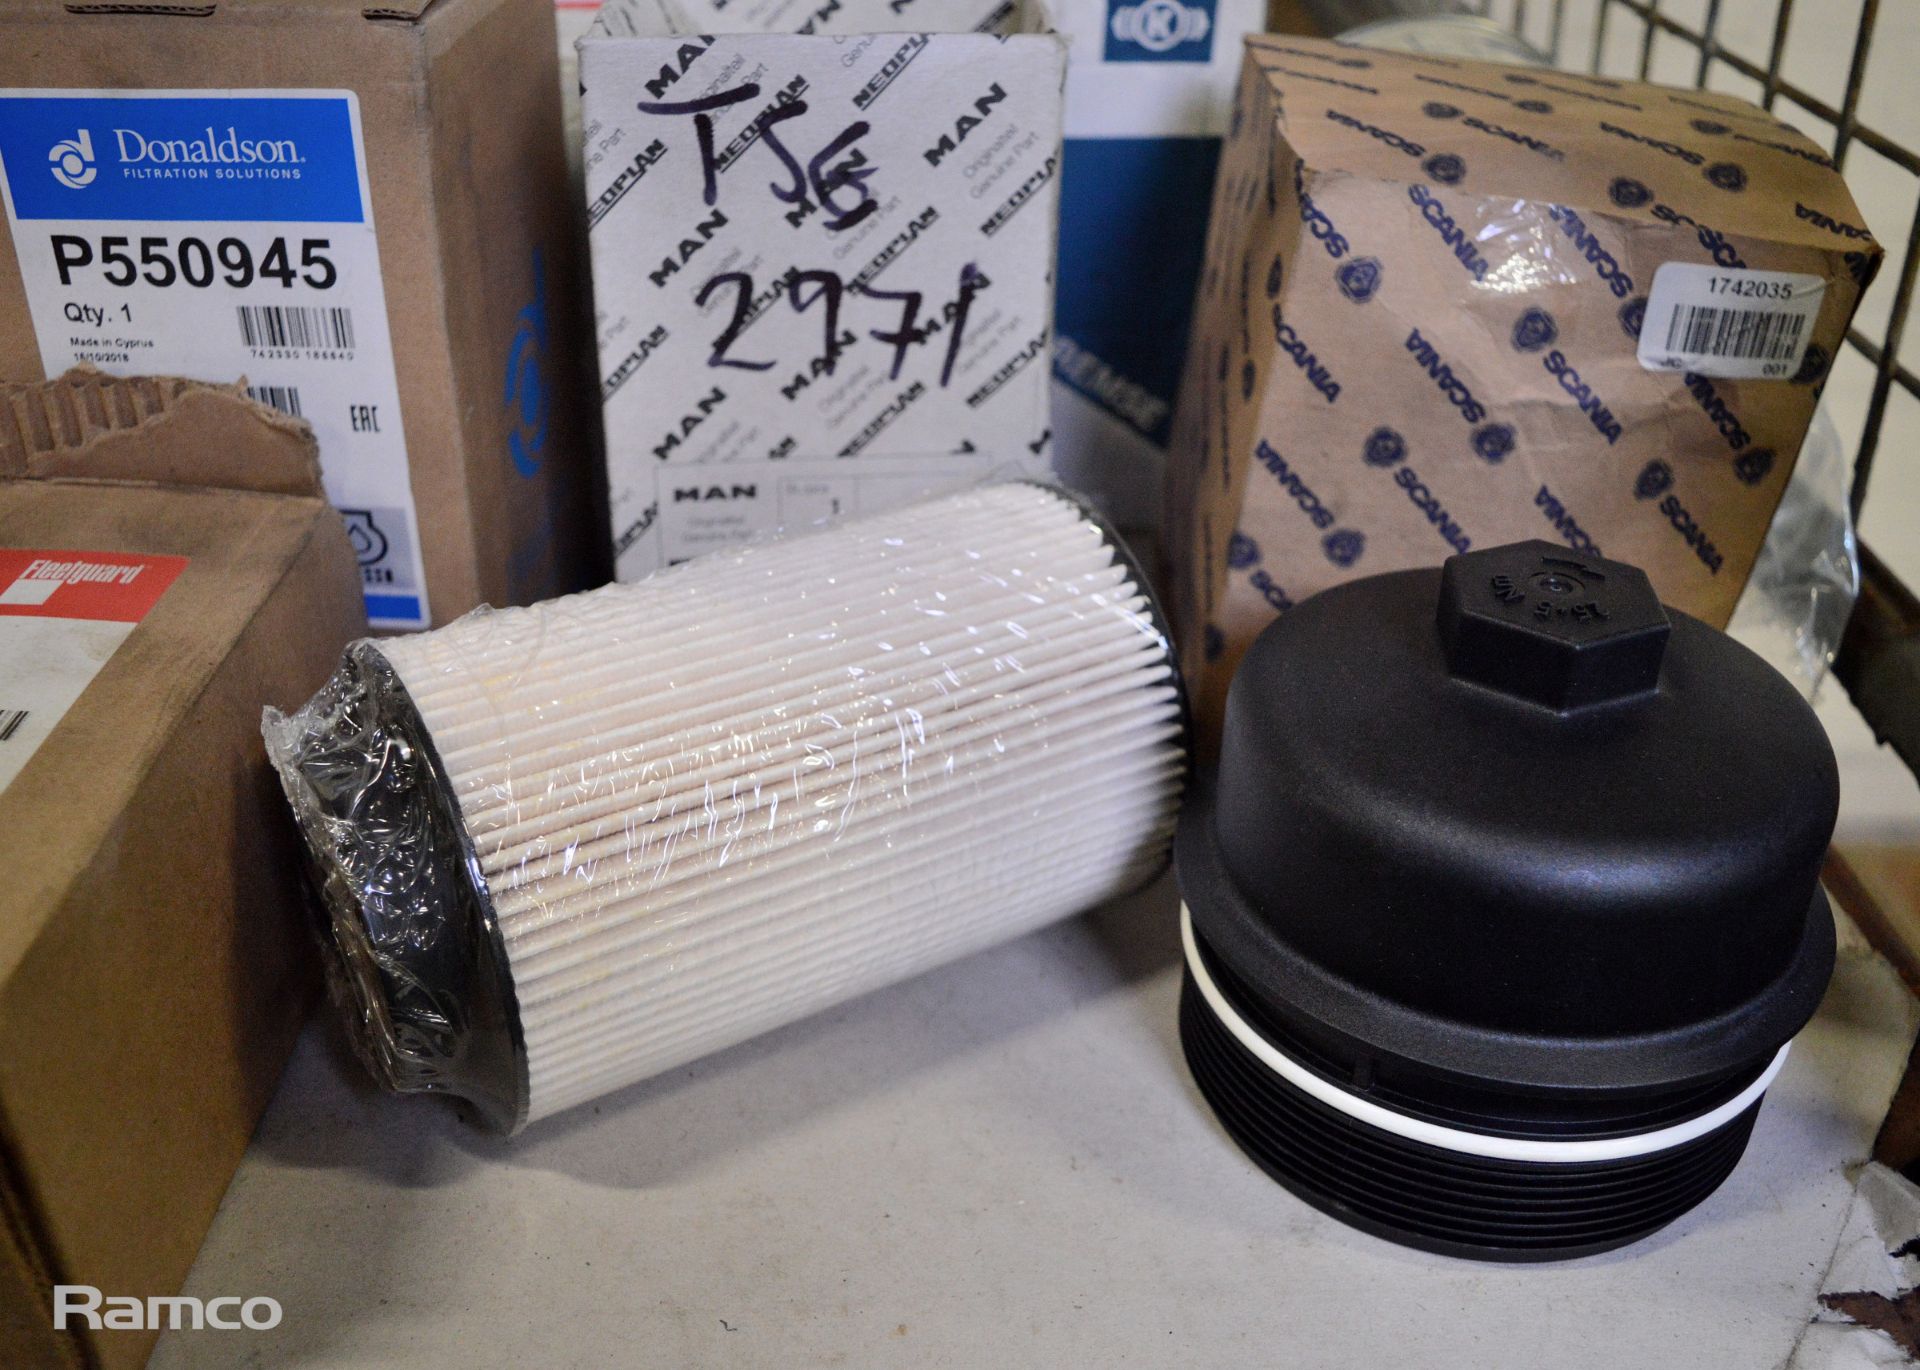 Assorted Vehicle Filters - Air, Oil, Fuel and Pollen Filters - Image 7 of 8